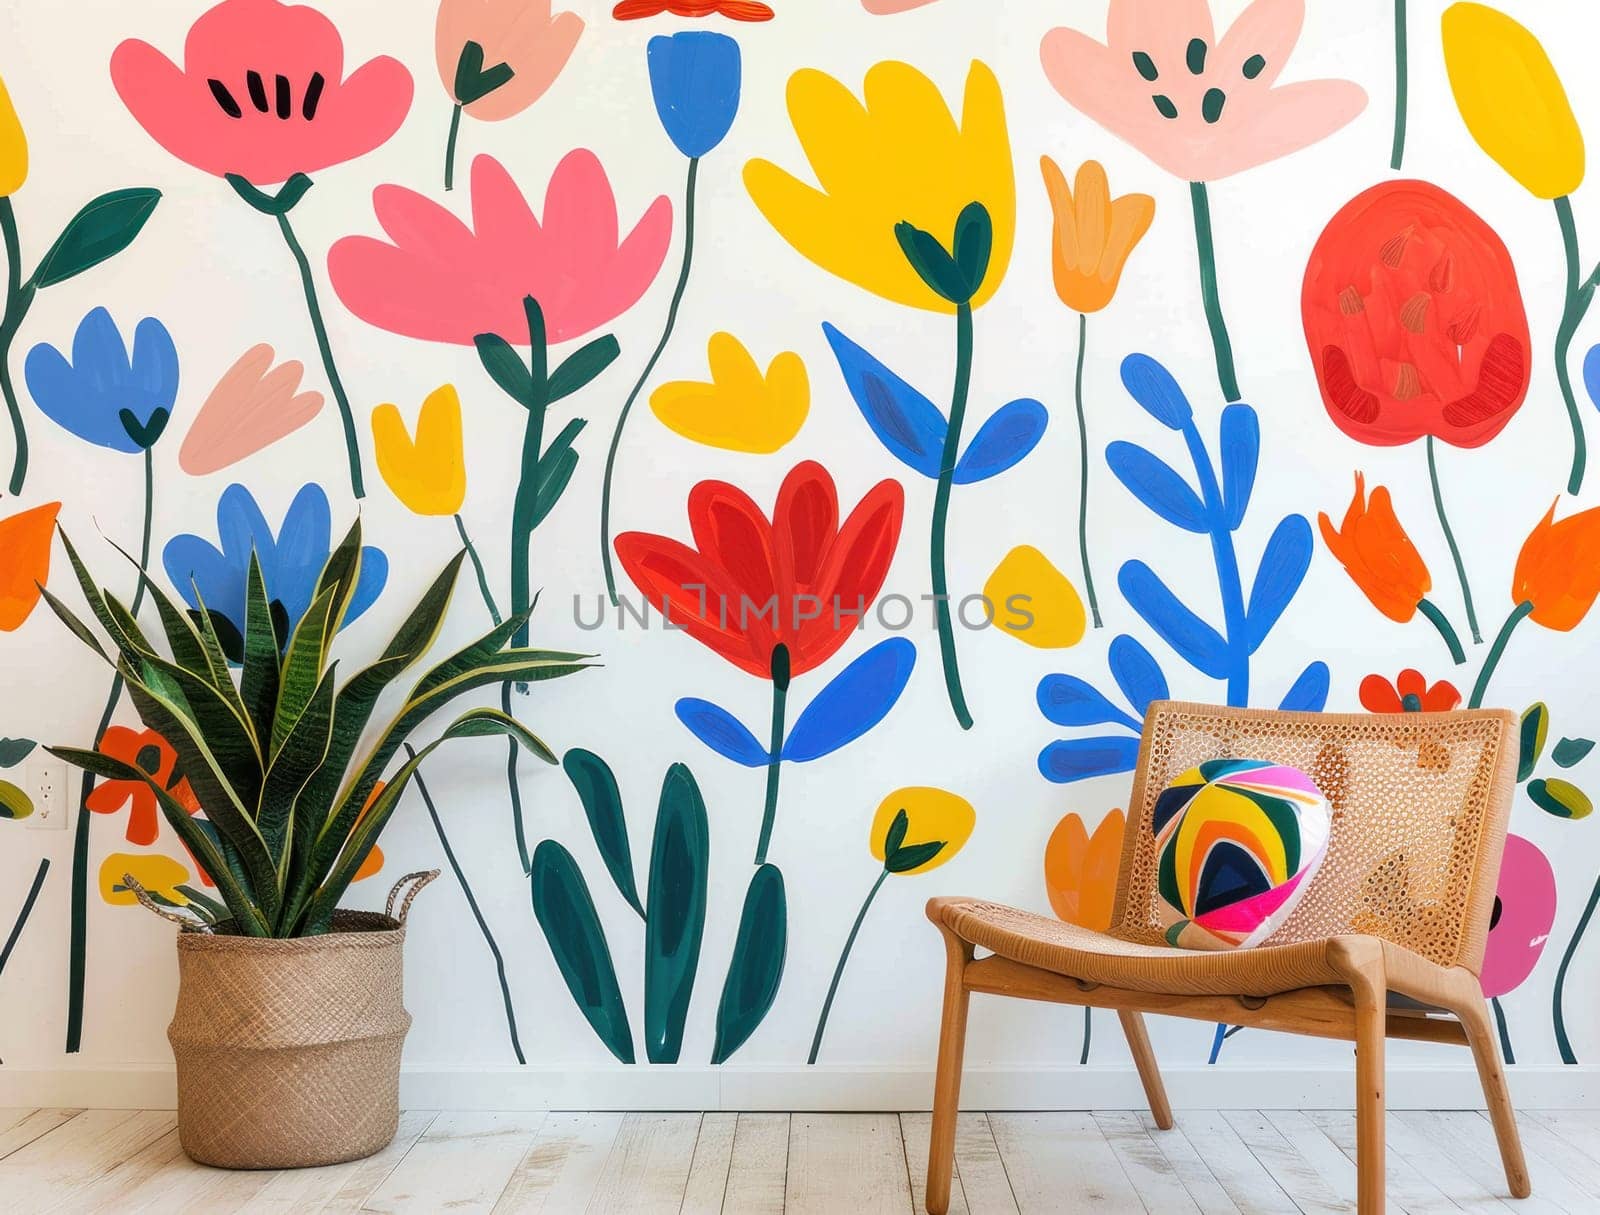 Colorful floral wall mural in room with chair and plant beauty and tranquility in interior design concept